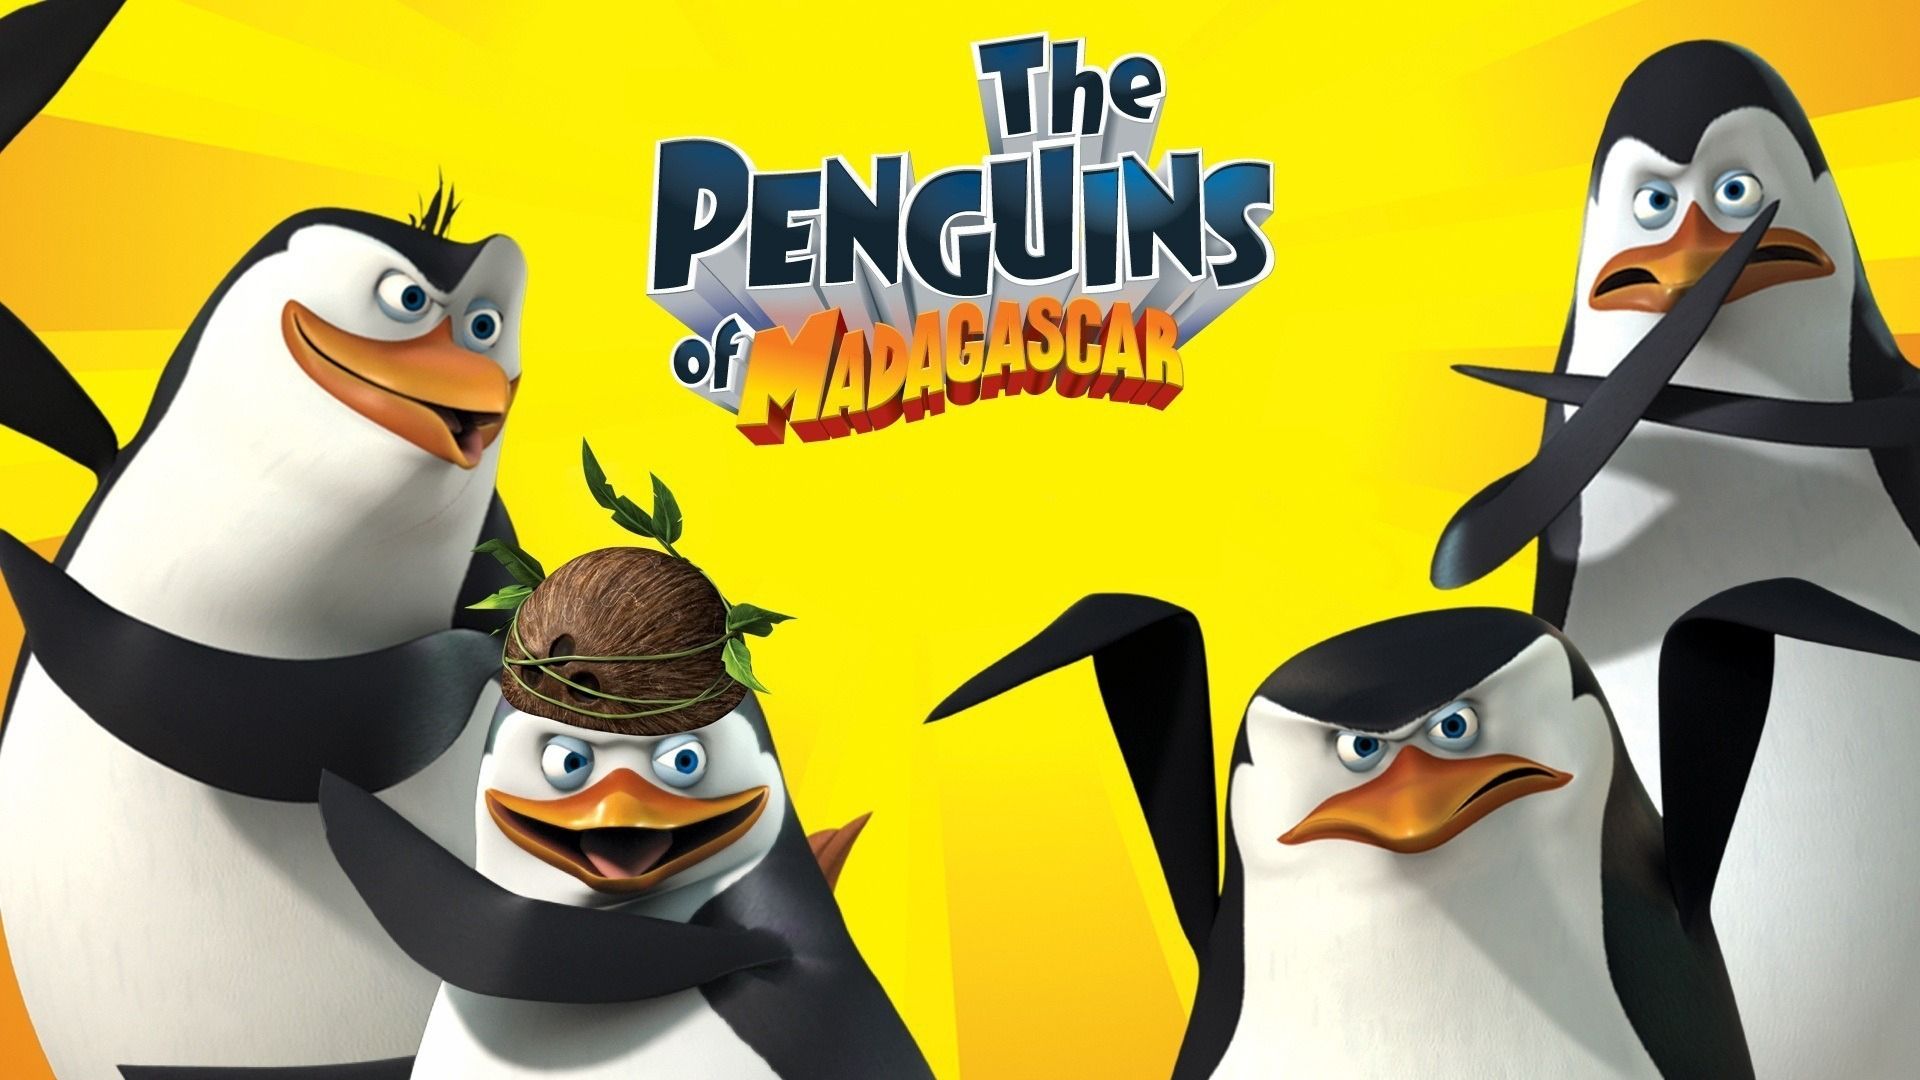 The Penguins of Madagascar Movie Wallpaper Image for Phone